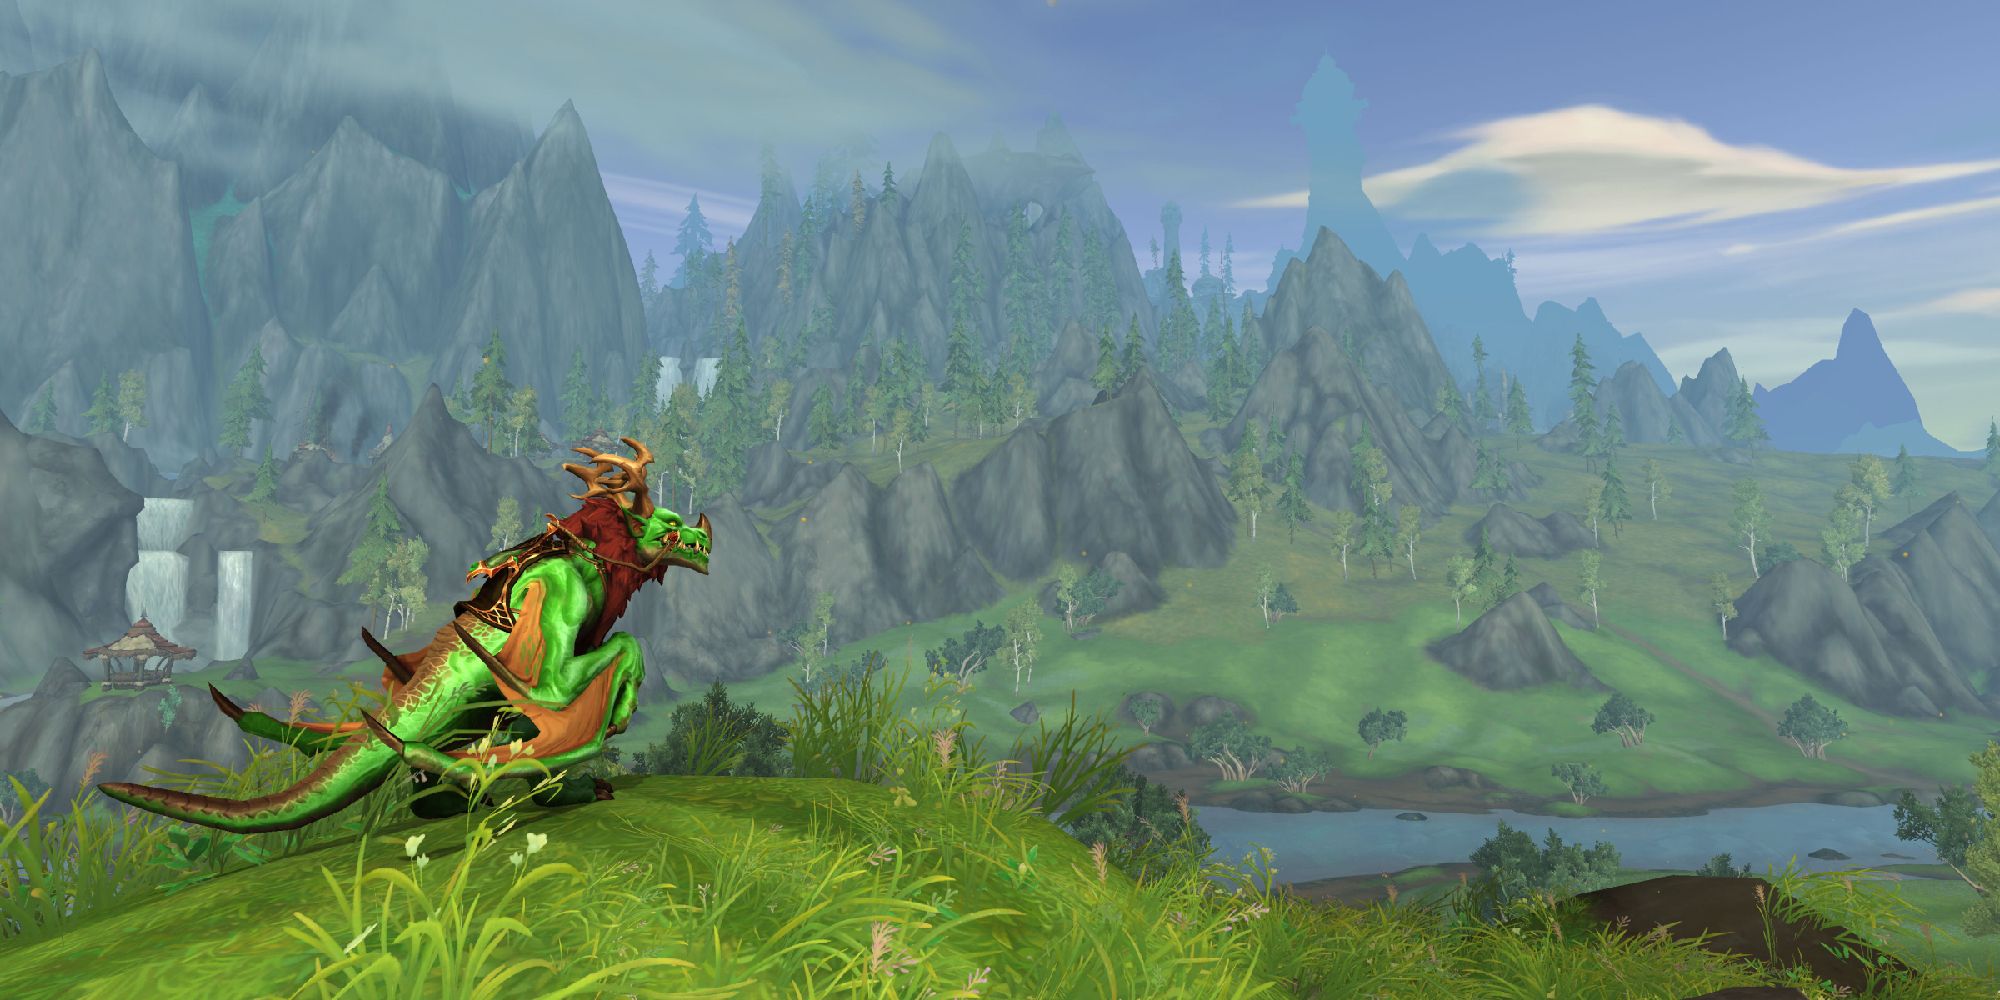 dragon perched on edge of grassy hill looking towards mountainy area